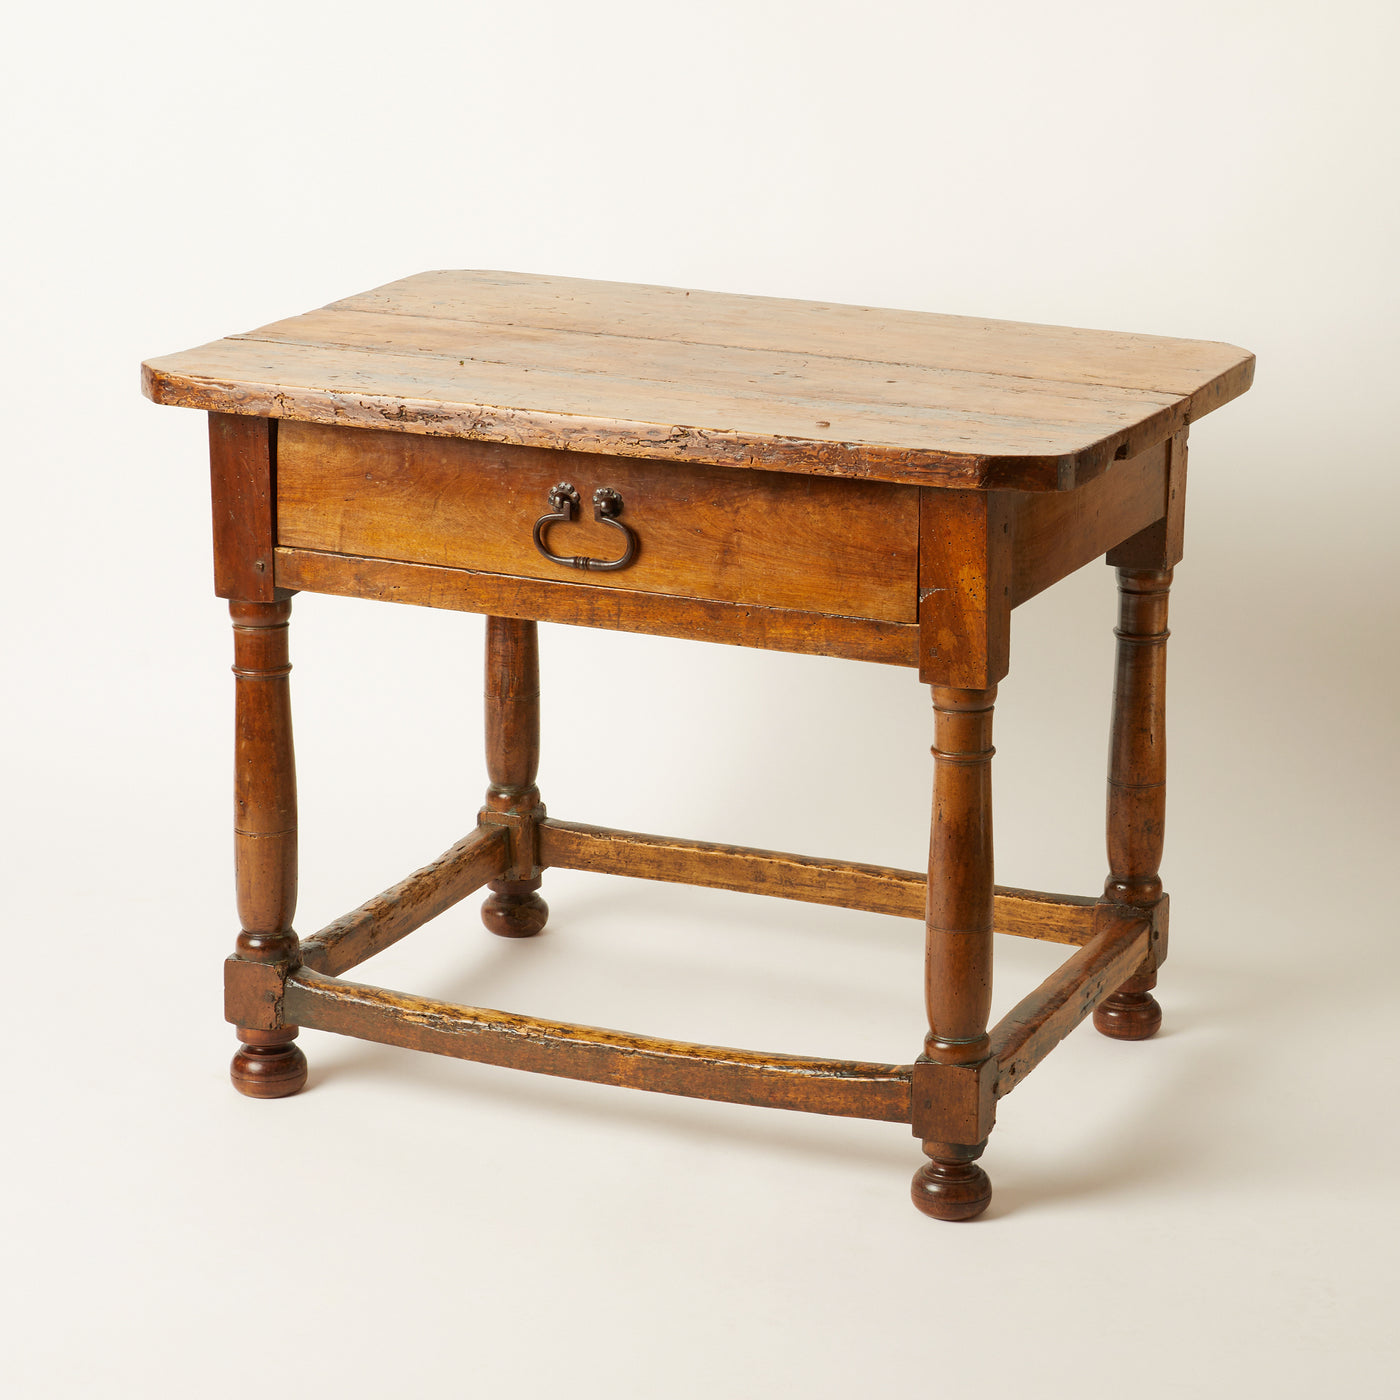 Rustic Oak Table, 18Th C. French